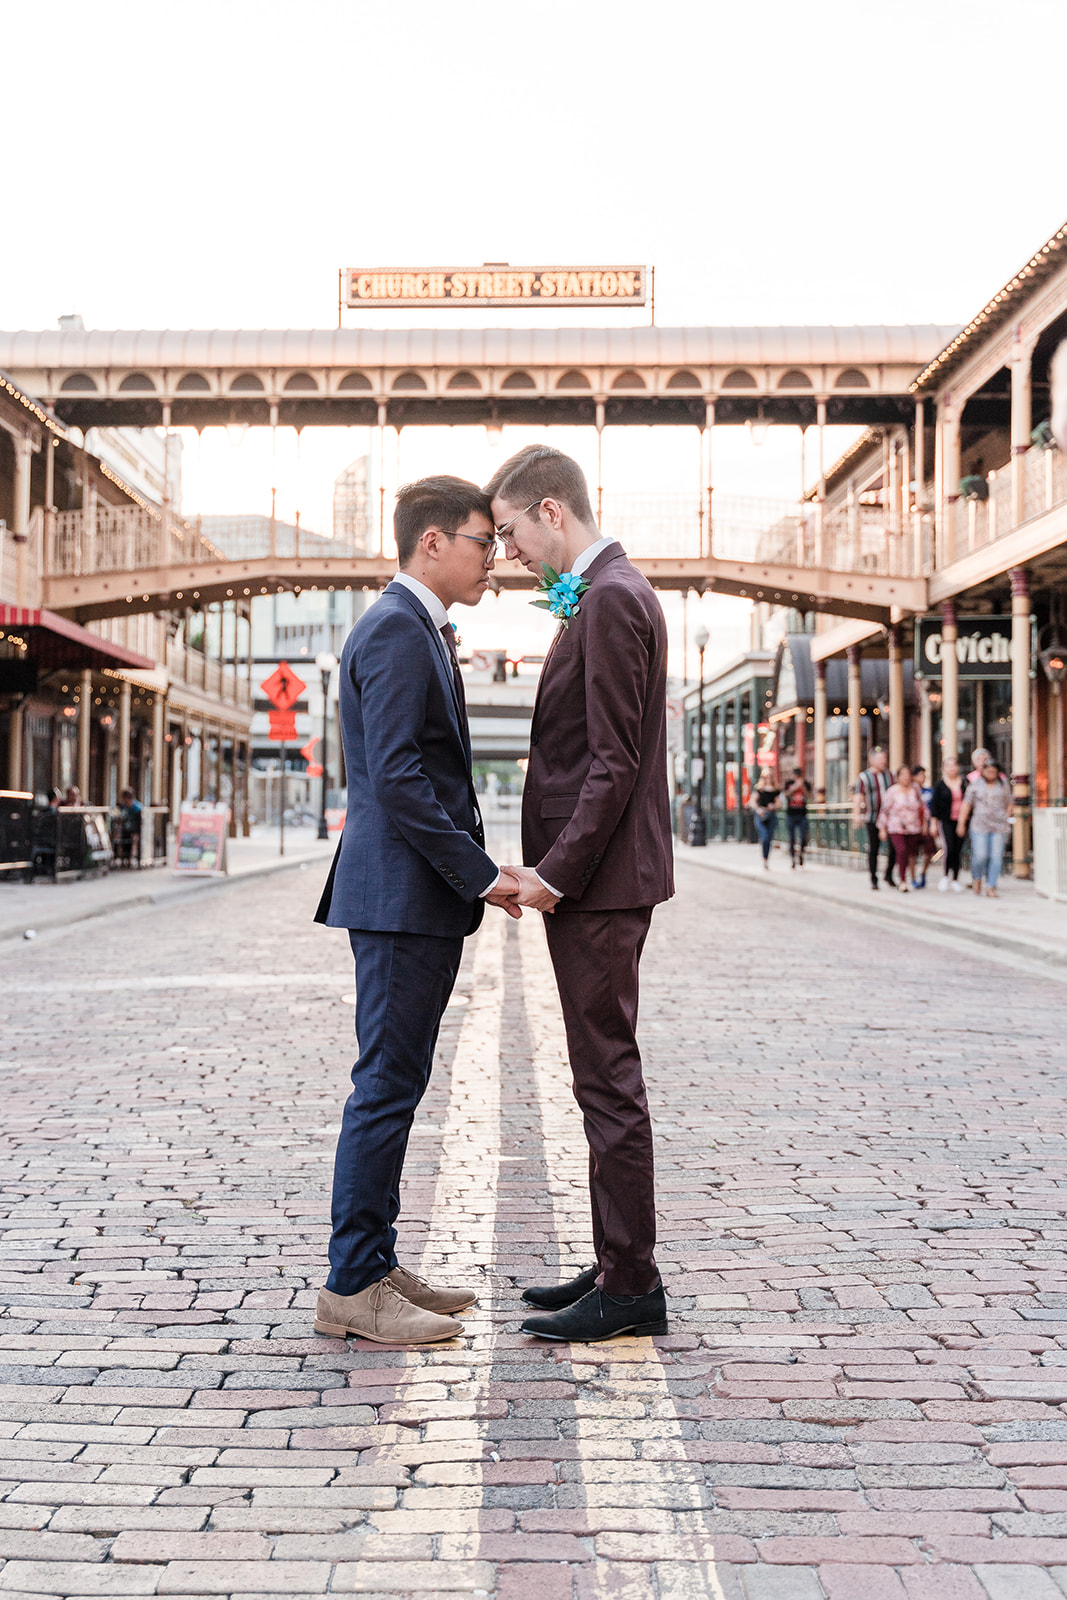 Two grooms touch foreheads under the iconic Church Street Station sign in downtown Orlando, FL, sharing a moment of love and connection.